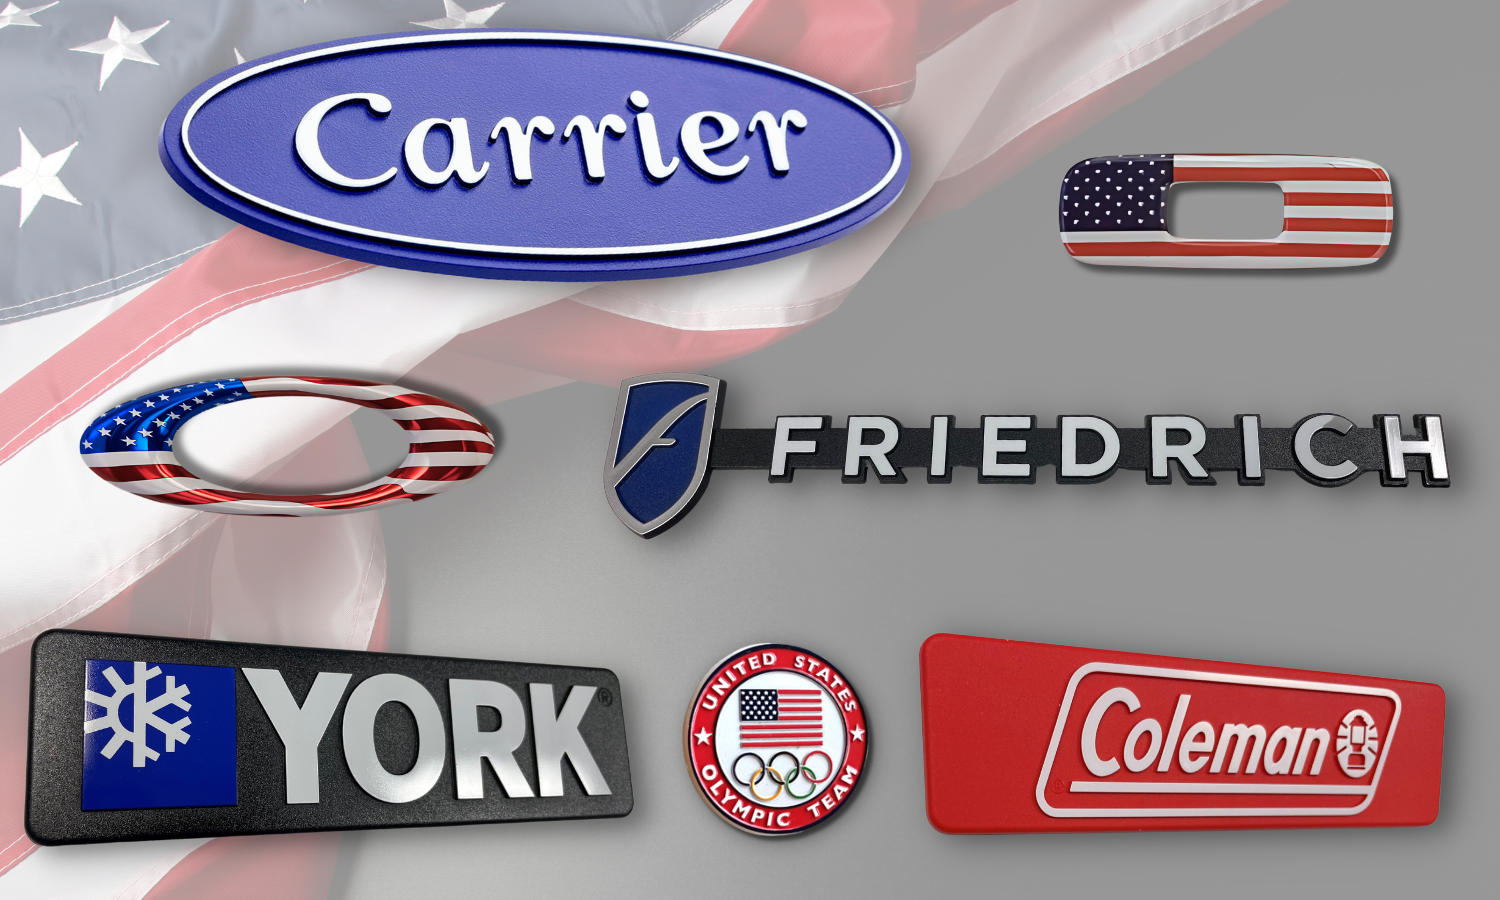 collage of red, white, and blue americana themed nameplates - Carrier, Coleman, York, Friedrich, Oakley, Polo Ralph Lauren, olympics, with american glad faded in background.